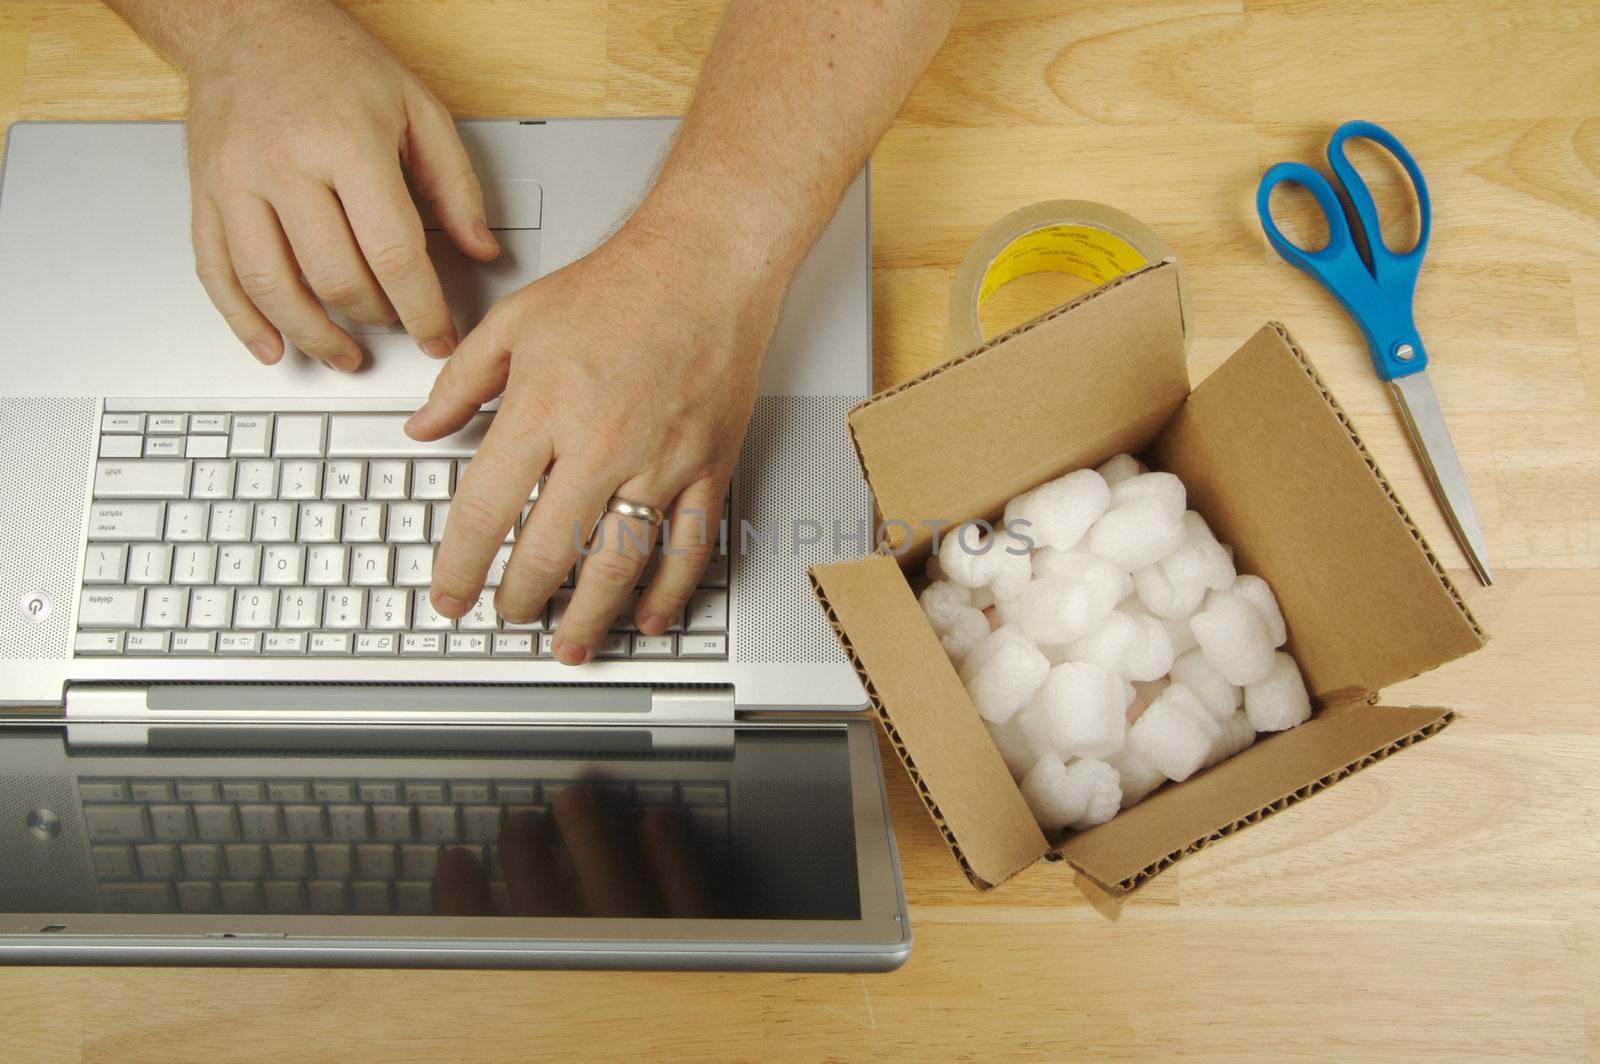 Businessman Works on Laptop with Packaging materials at his side.